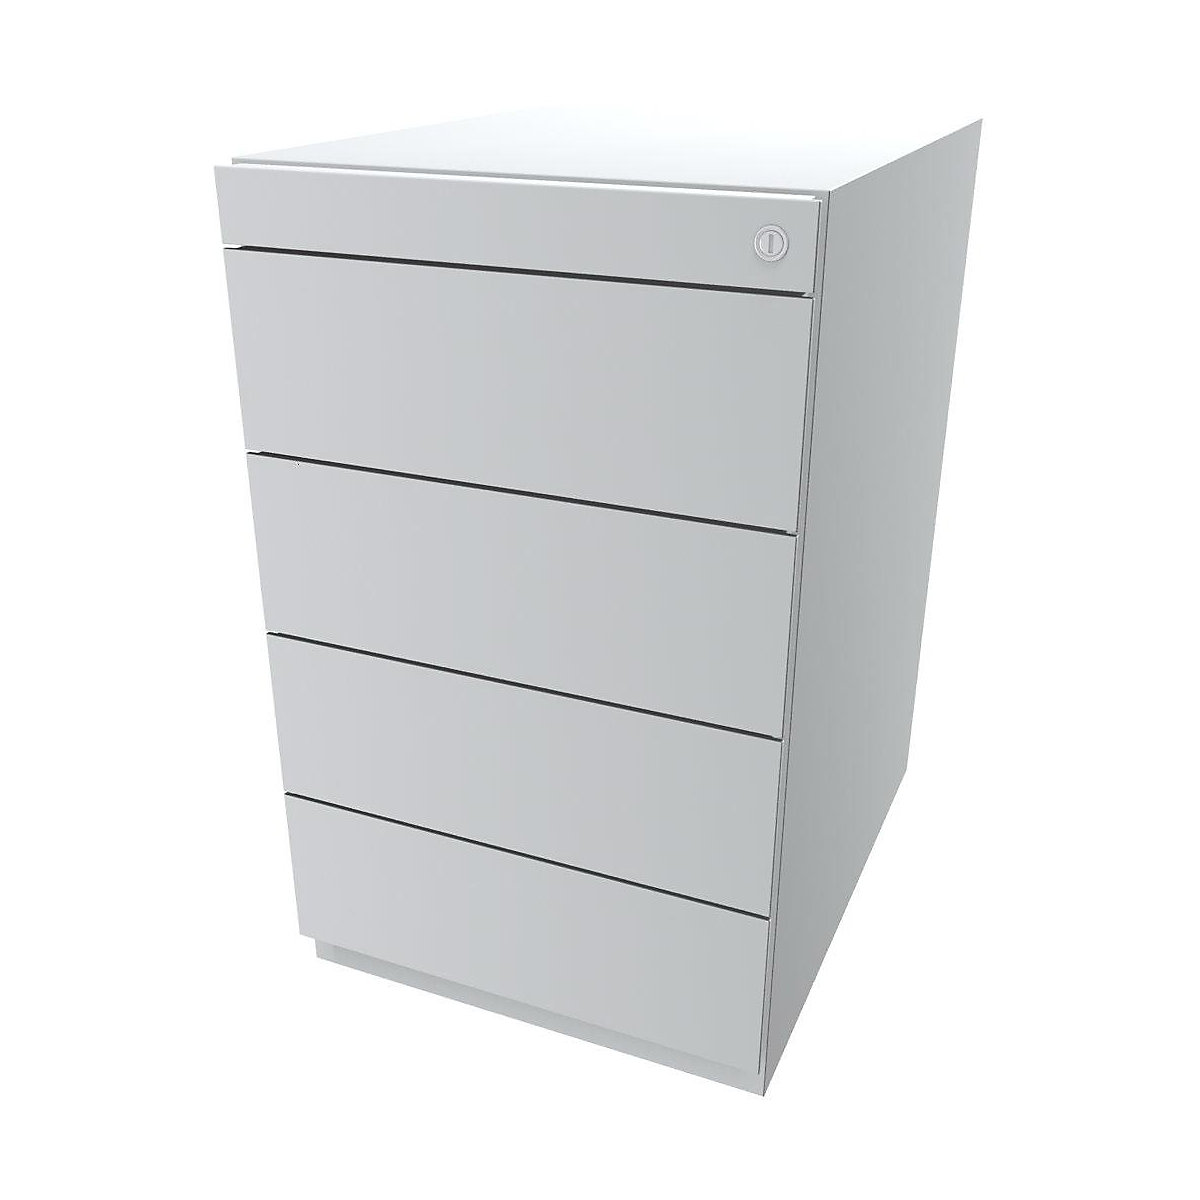 Note™ fixed pedestal, with 4 universal drawers – BISLEY